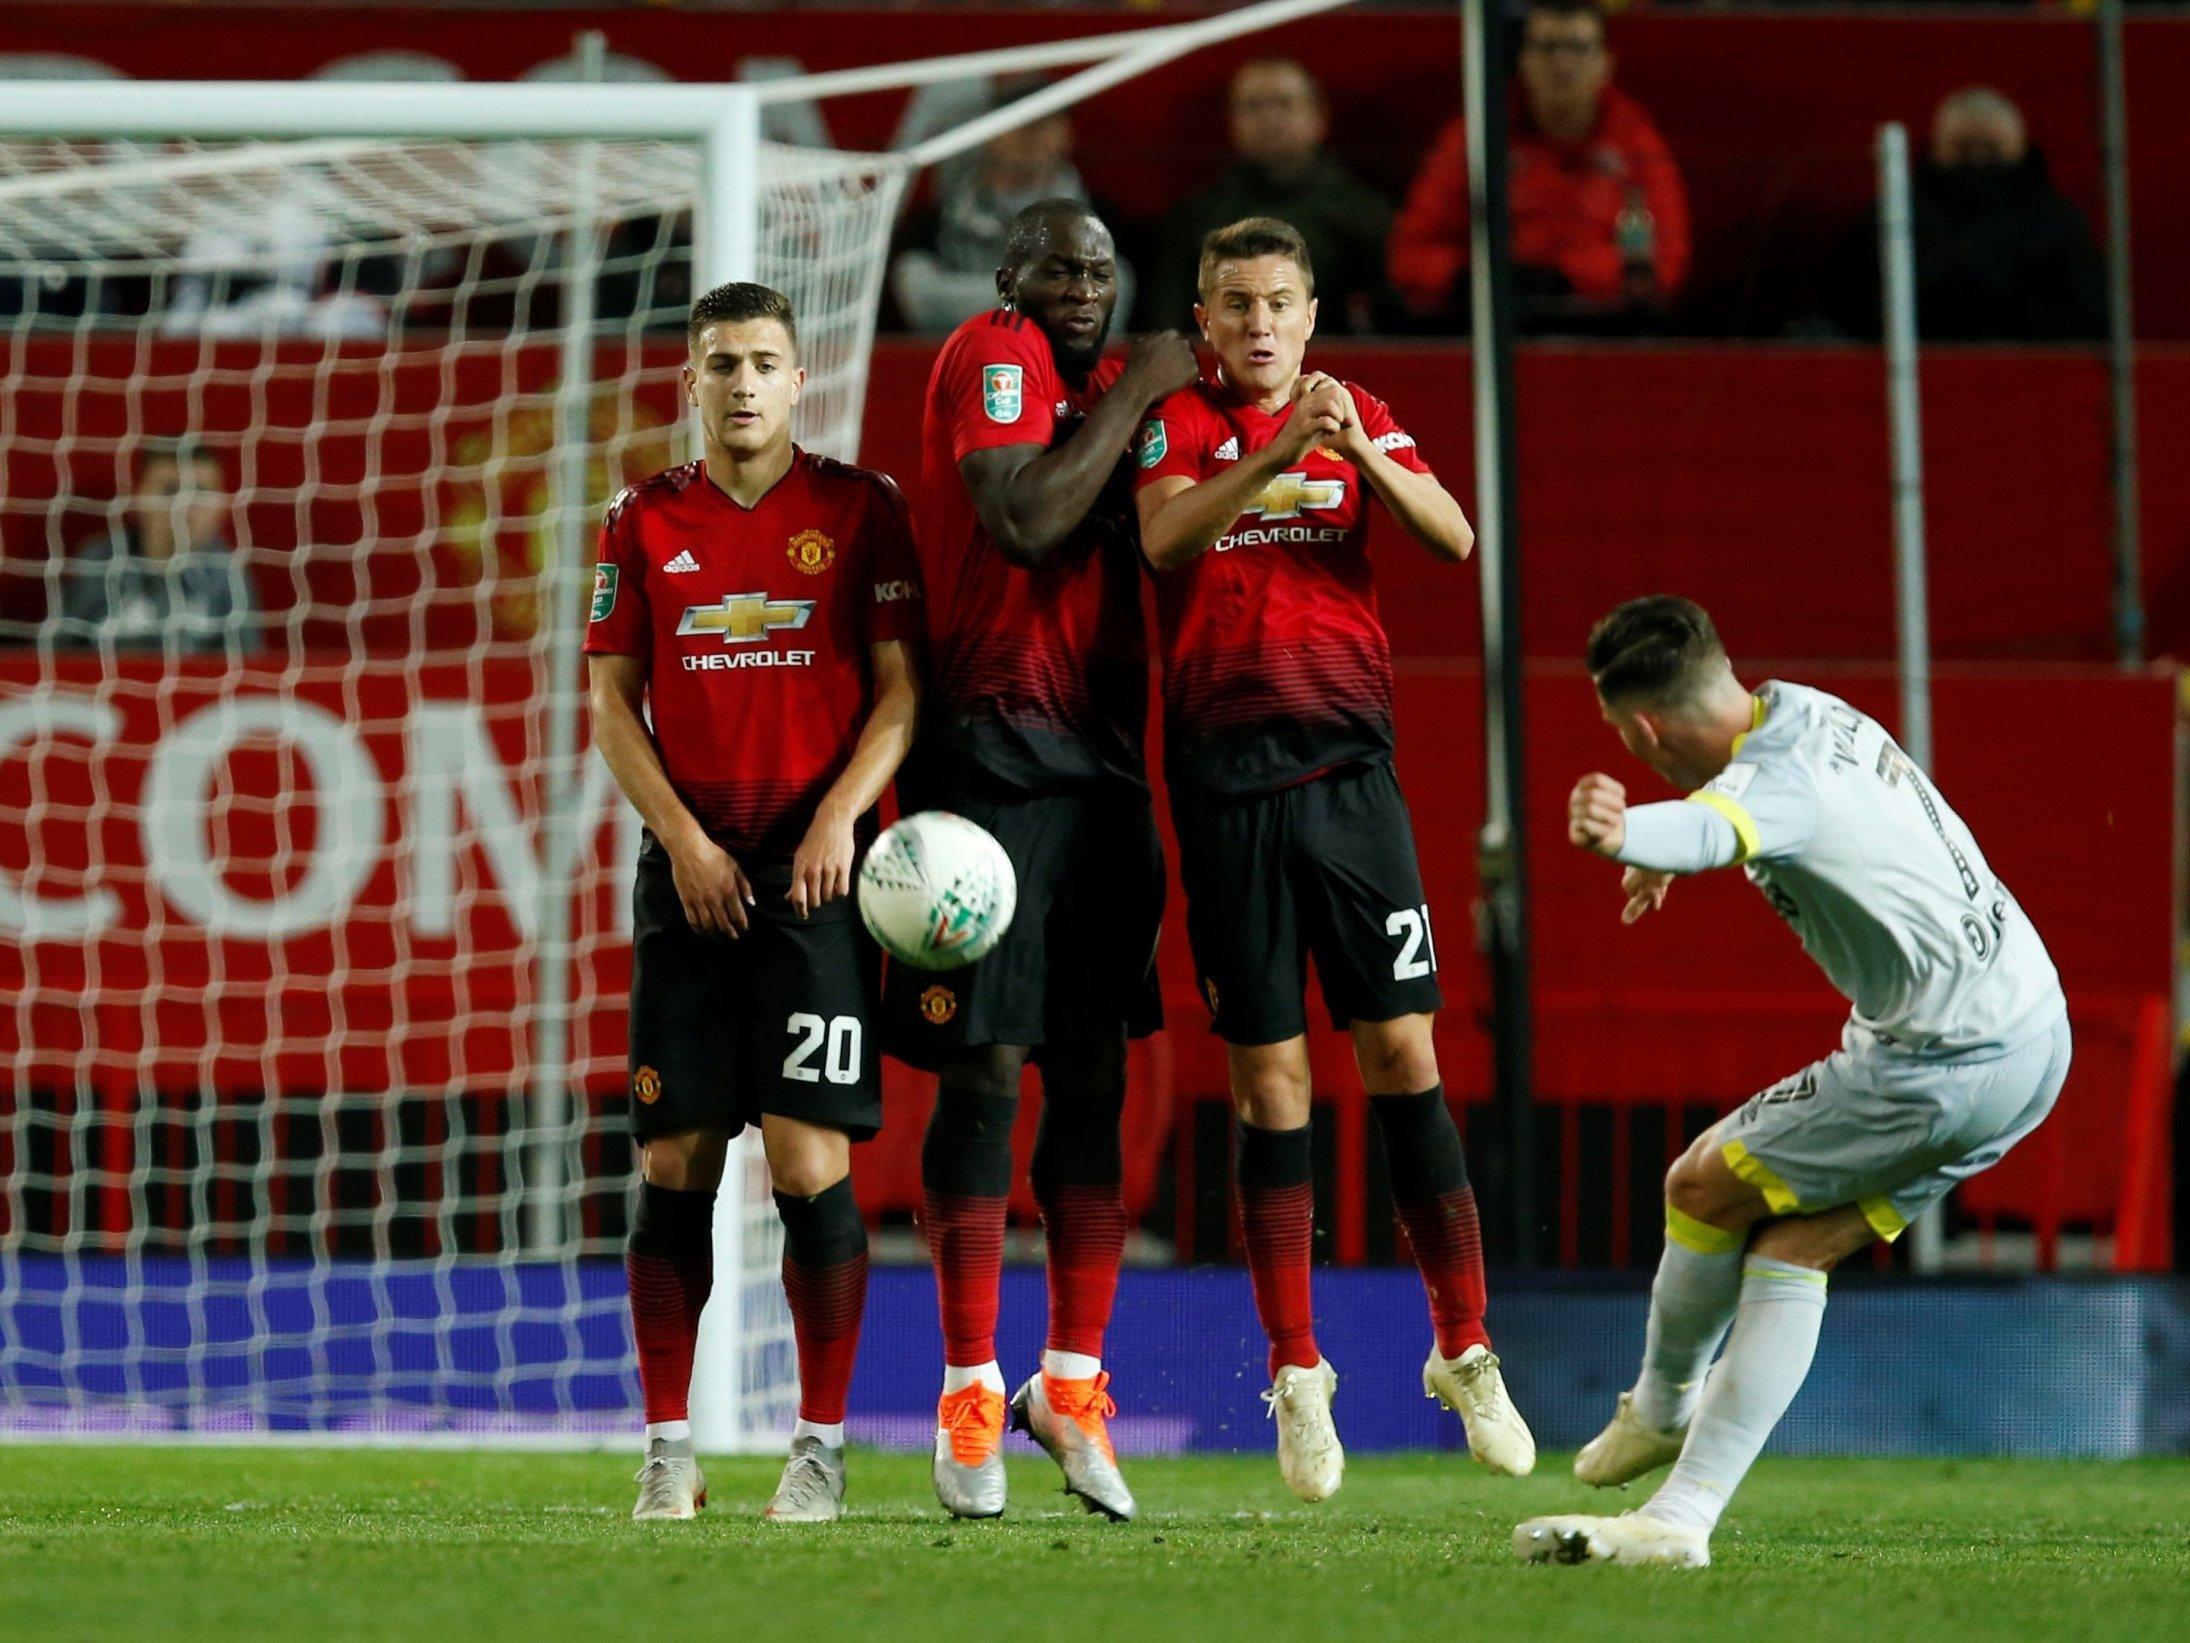 Harry Wilson scores a brilliant free kick Derby County knocked Manchester United out of the EFL Cup on penalties